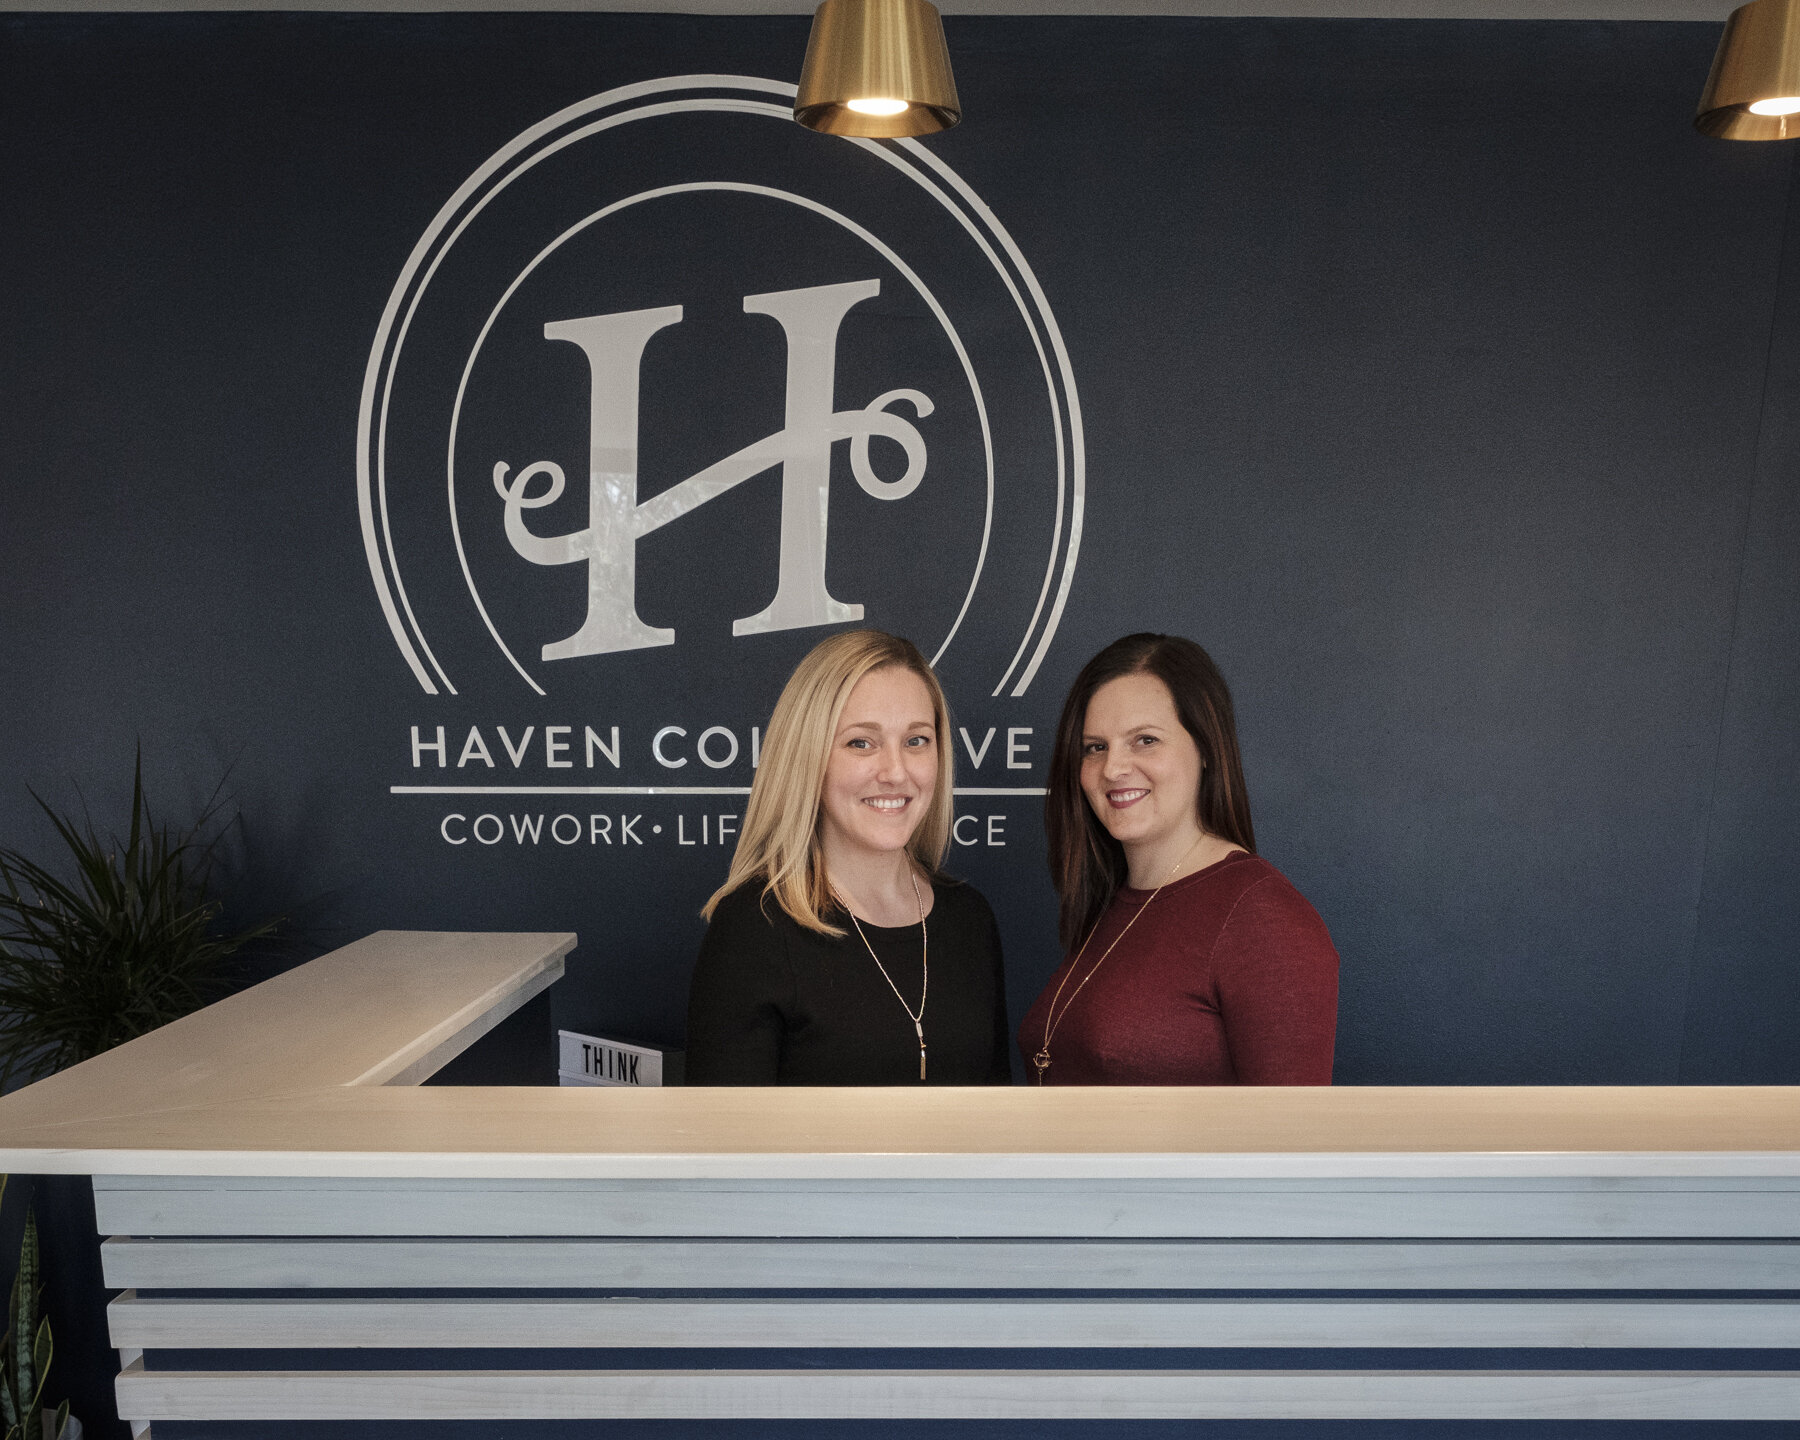  Immediately upon entering one of the Haven Collective locations, you’ll be greeted most likely by one of us, Mel + Danielle, co-owners. Our goal every day is to make you feel at home, get you connected, and help you grow personally and professionall